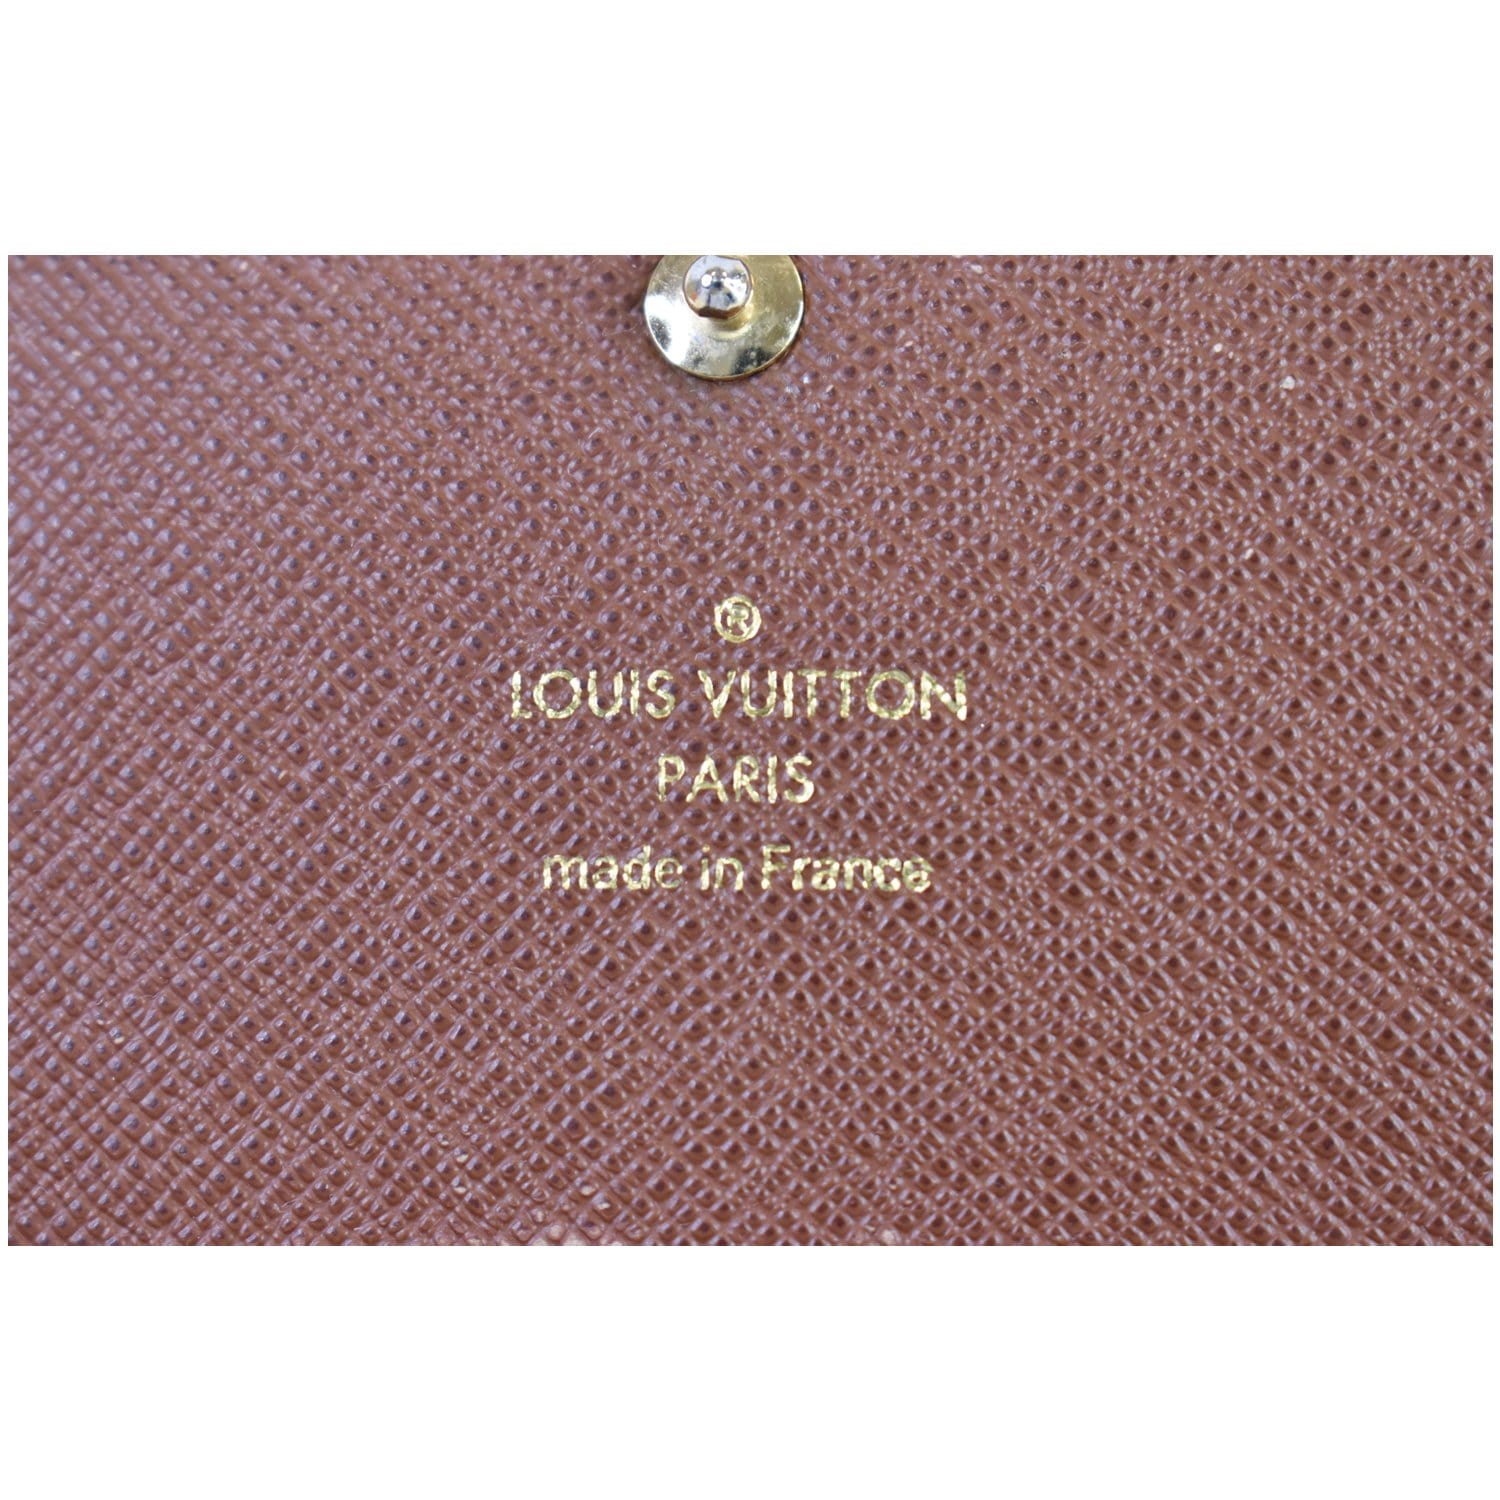 Emilie leather wallet Louis Vuitton Black in Leather - 35287564